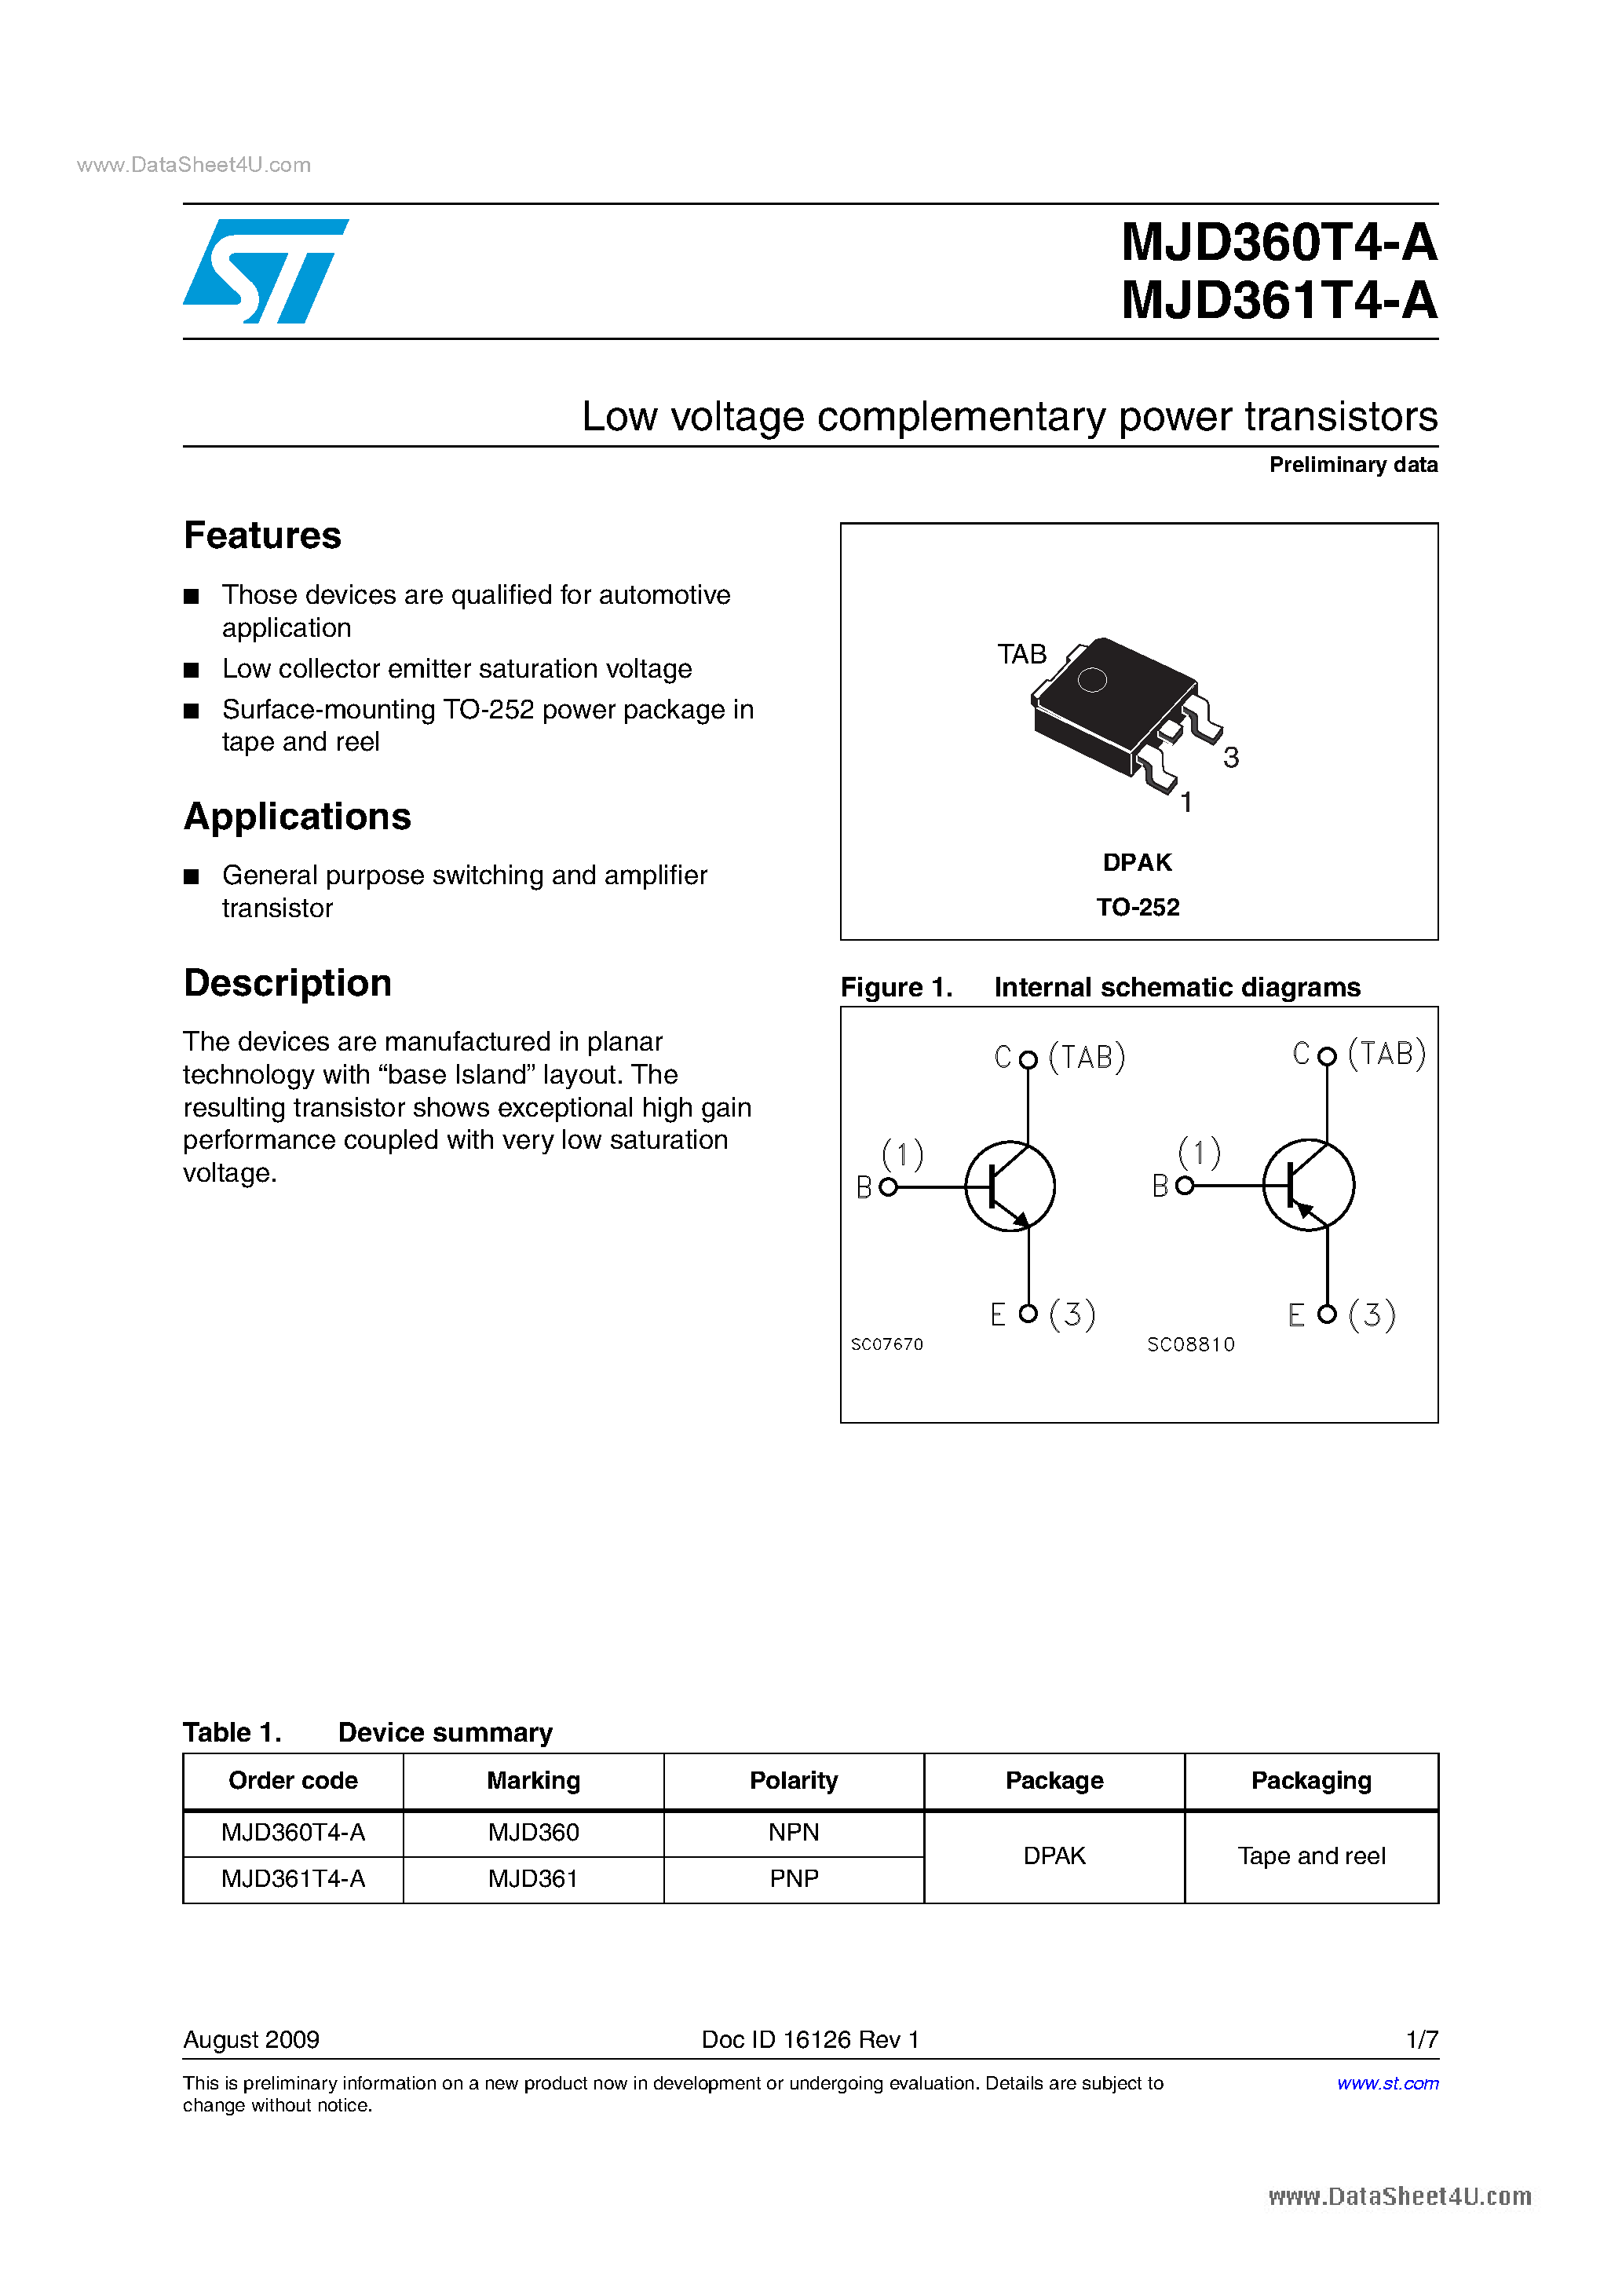 Даташит MJD360T4-A-(MJD360T4-A / MJD361T4-A) Low Voltage Complementary Power Transistors страница 1